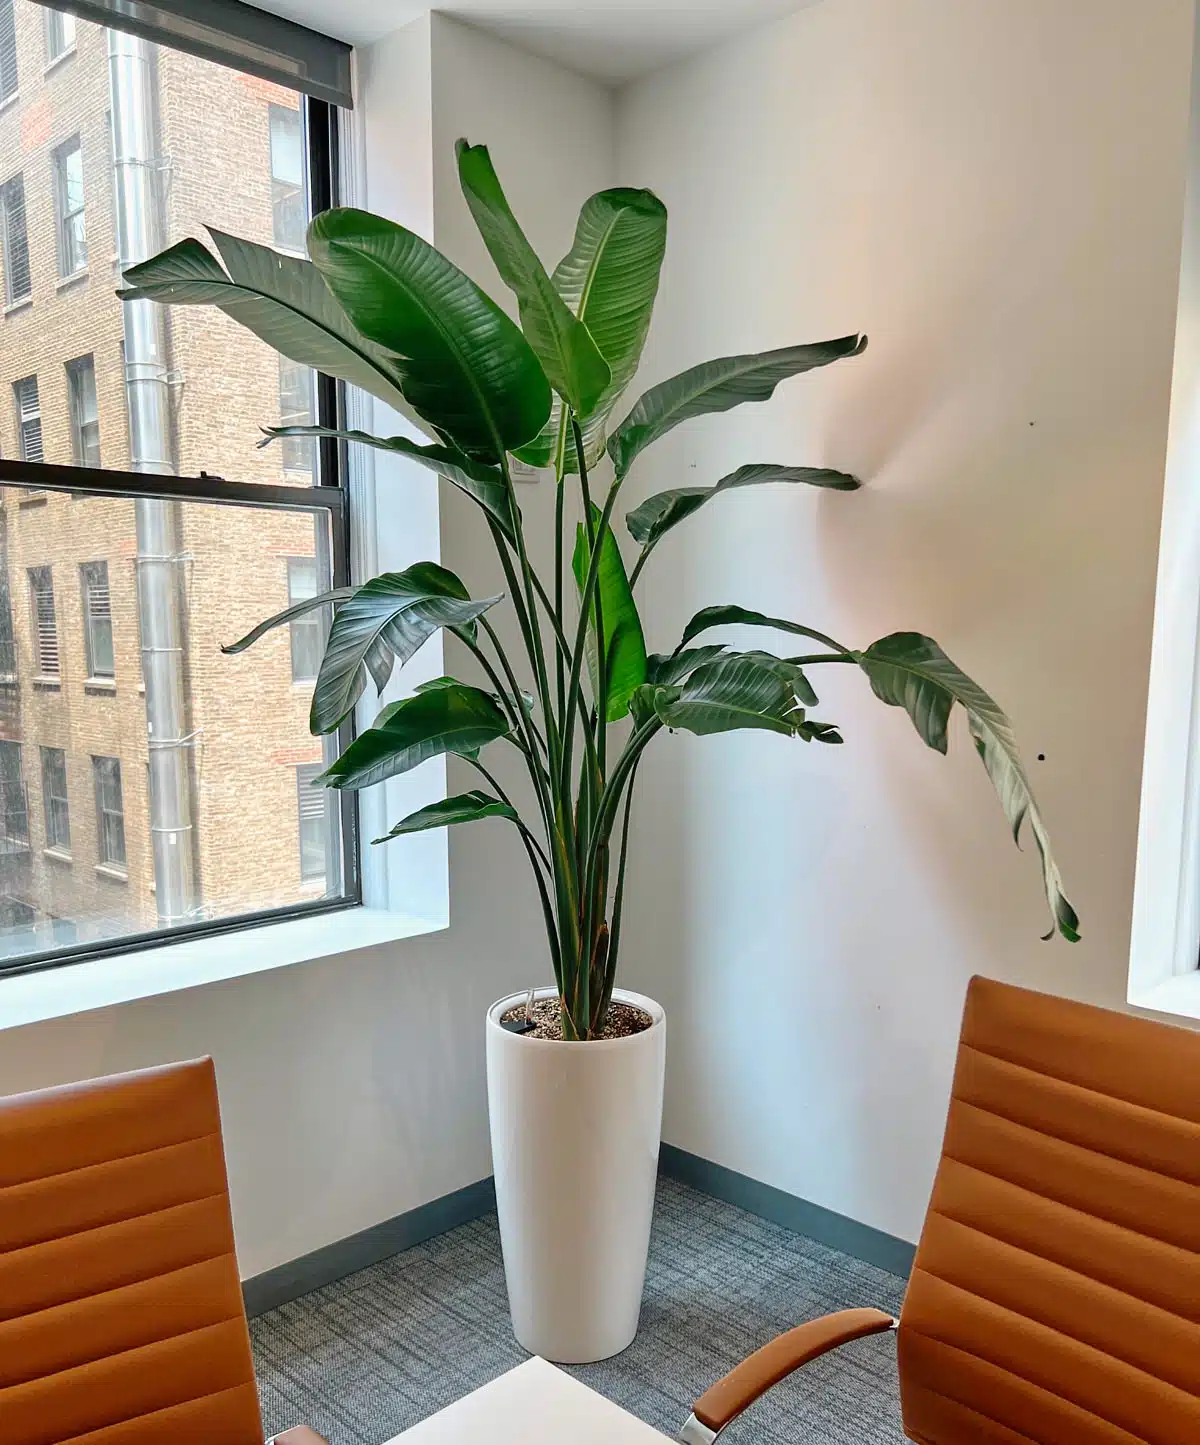 A Bird of Paradise plant in a tall white planter is positioned in the corner of a modern office, near a window offering a view of adjacent buildings, complemented by two orange chairs and a meeting table.